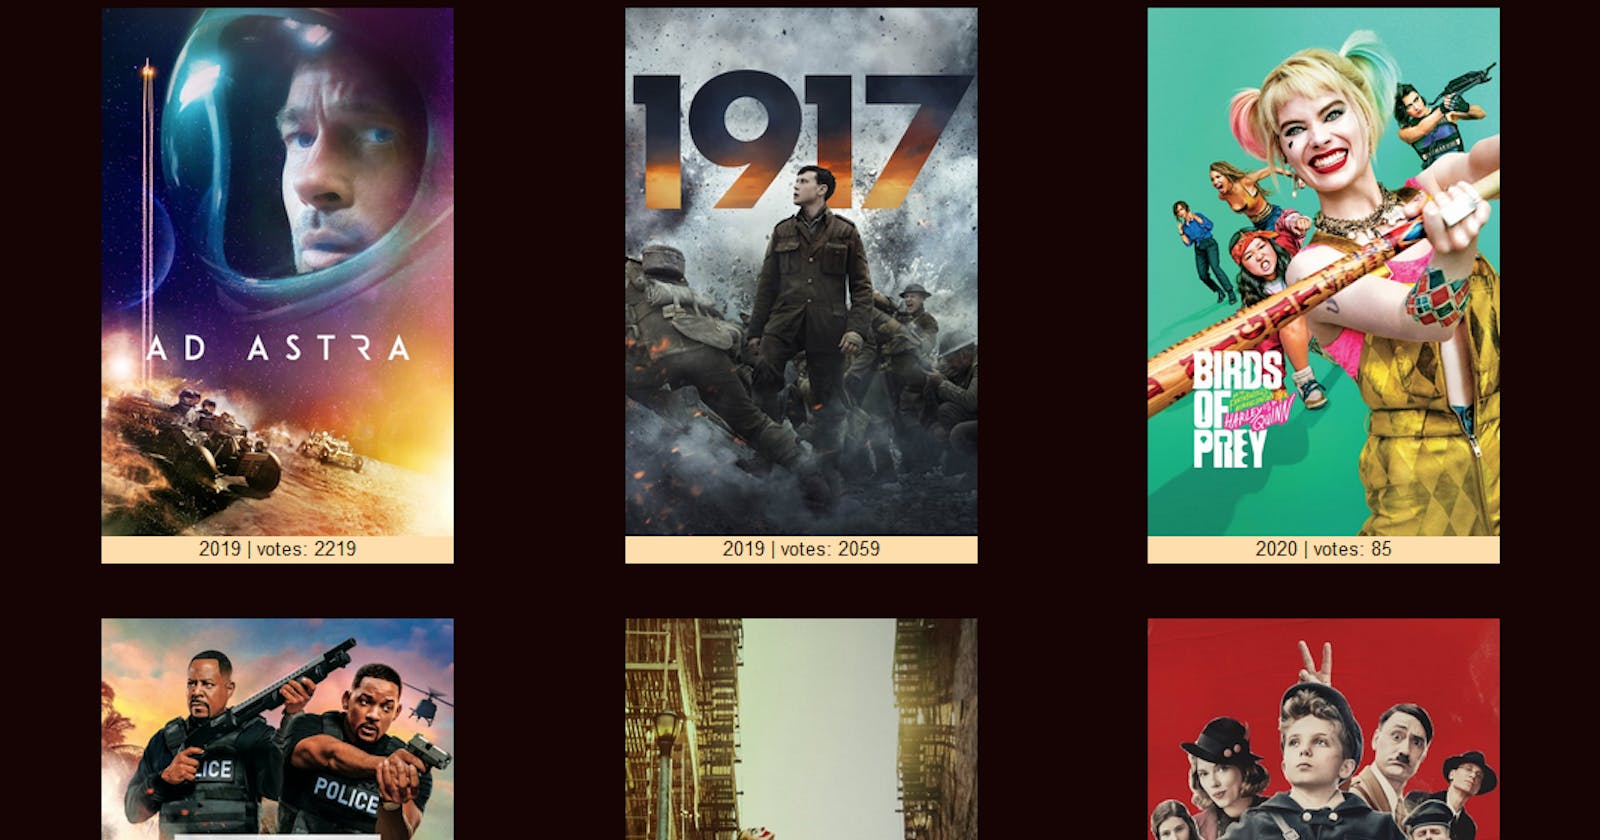 RETRIEVAL AND DISPLAY OF MOVIE LIST FROM API USING A SERVICE